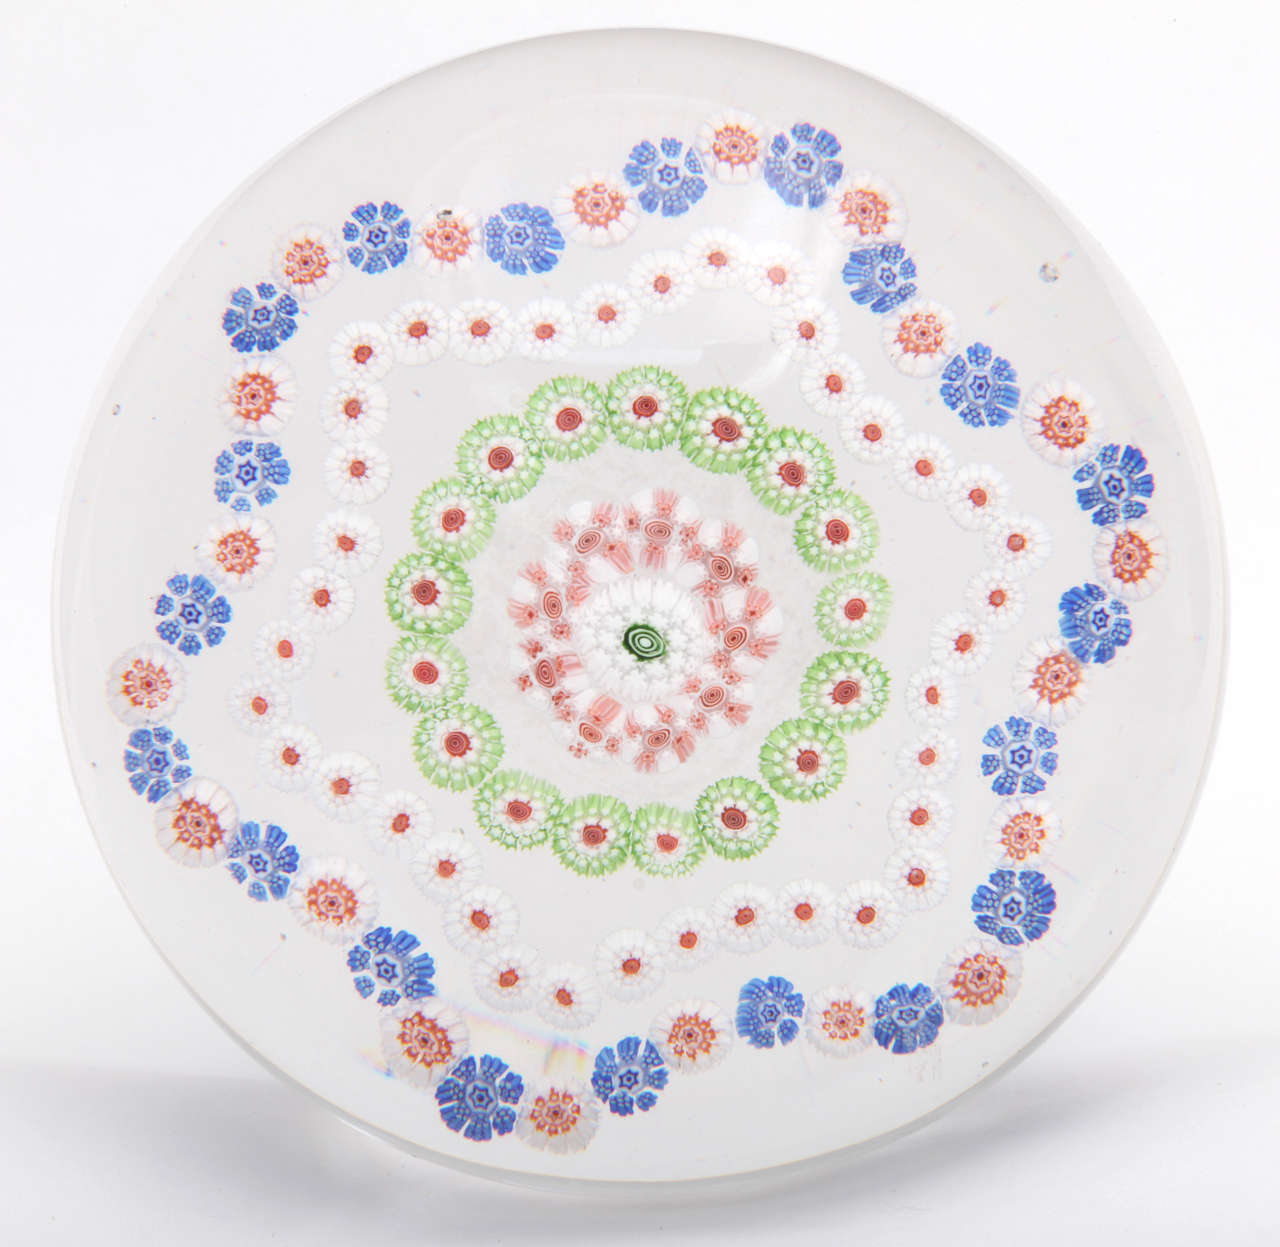 A rare antique Baccarat piedouche paperweight with a hexagon pattern millefiori design on top and blue and white torsade at the base